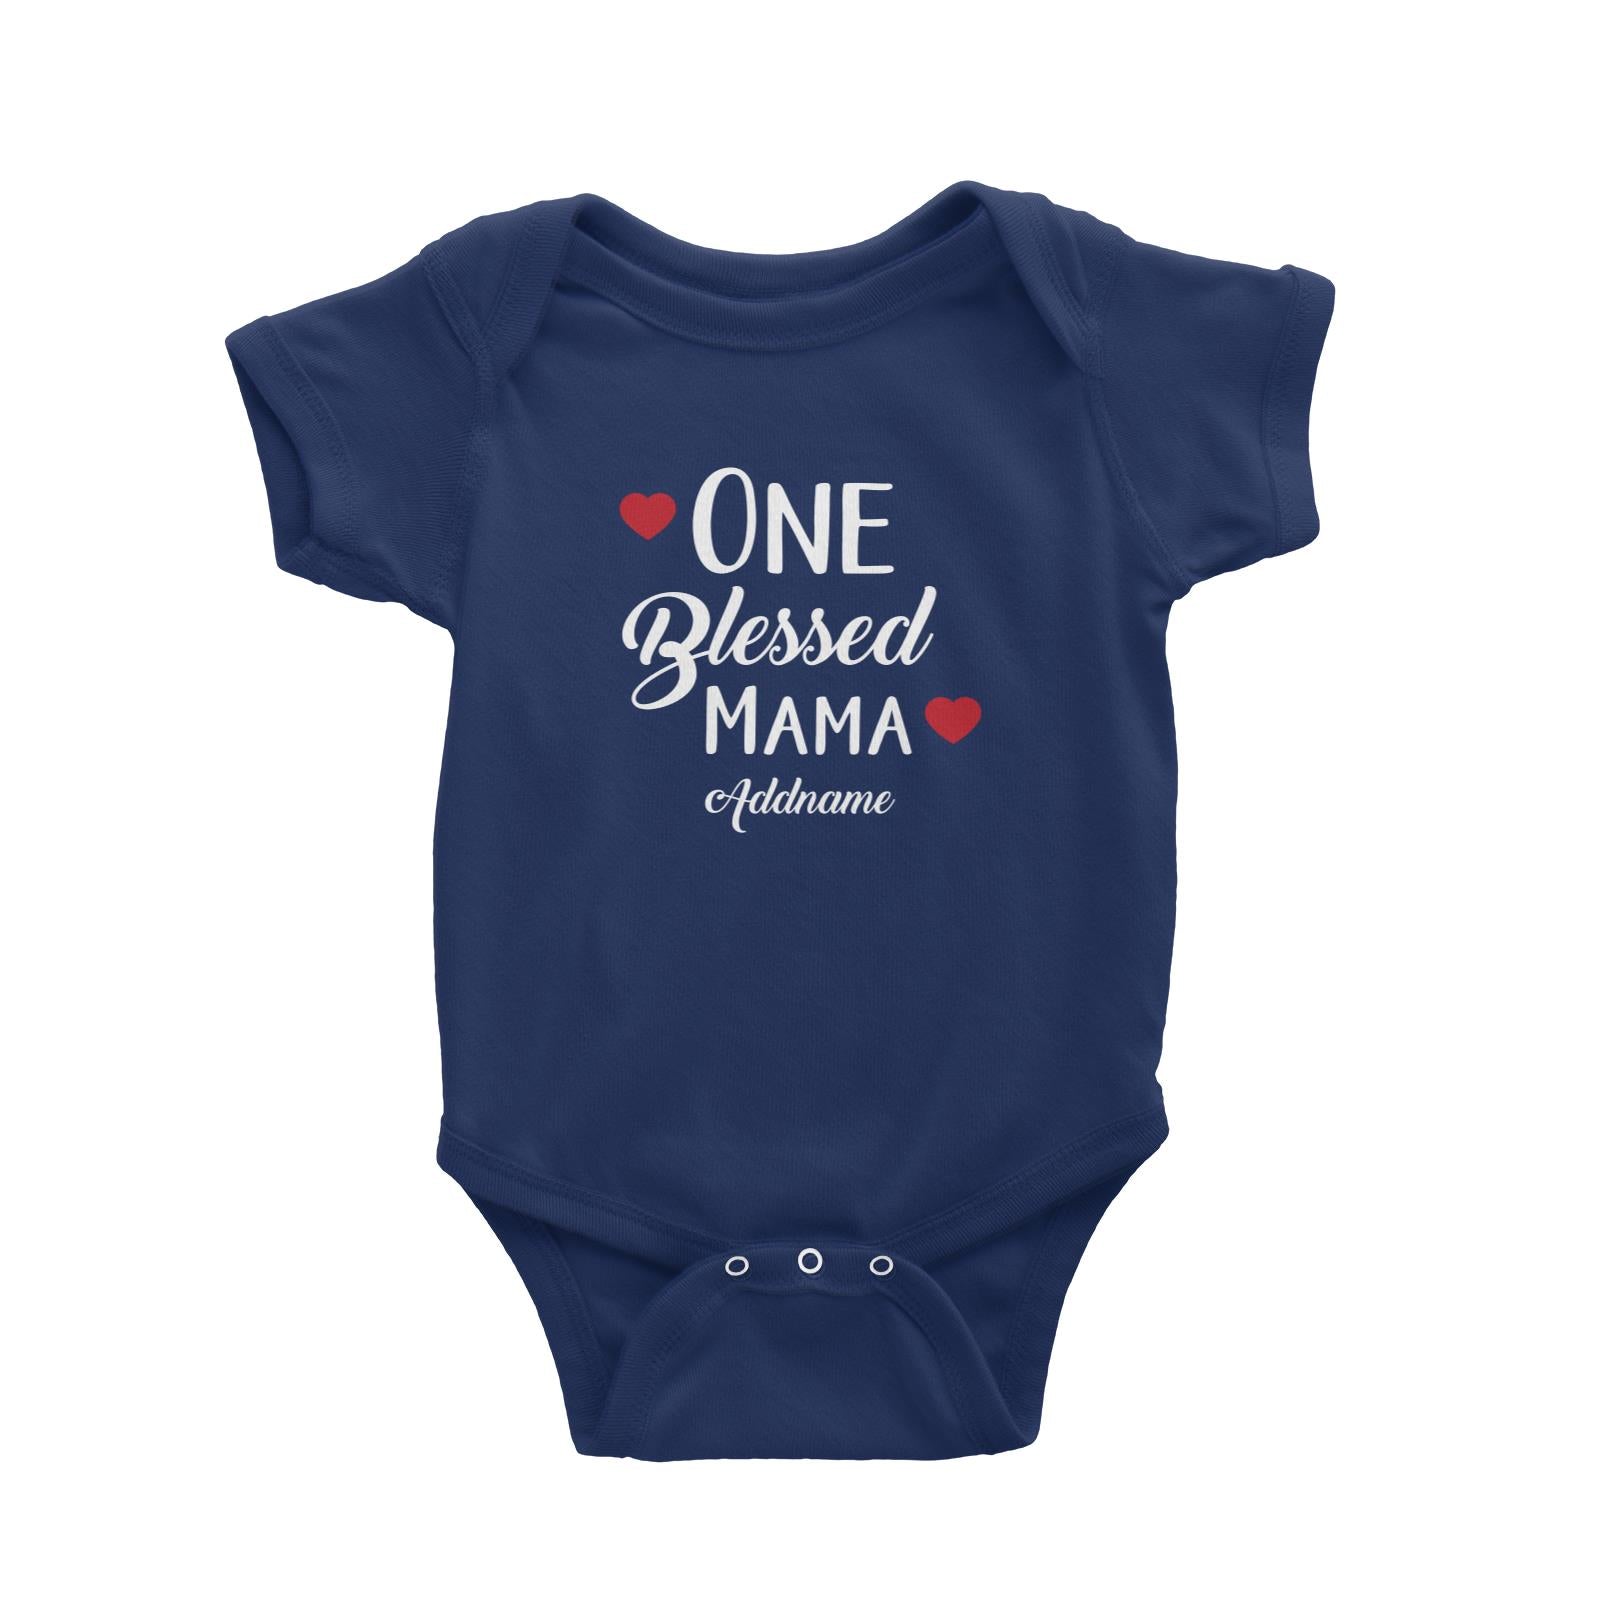 Christian Series One Blessed Mama Addname Baby Romper